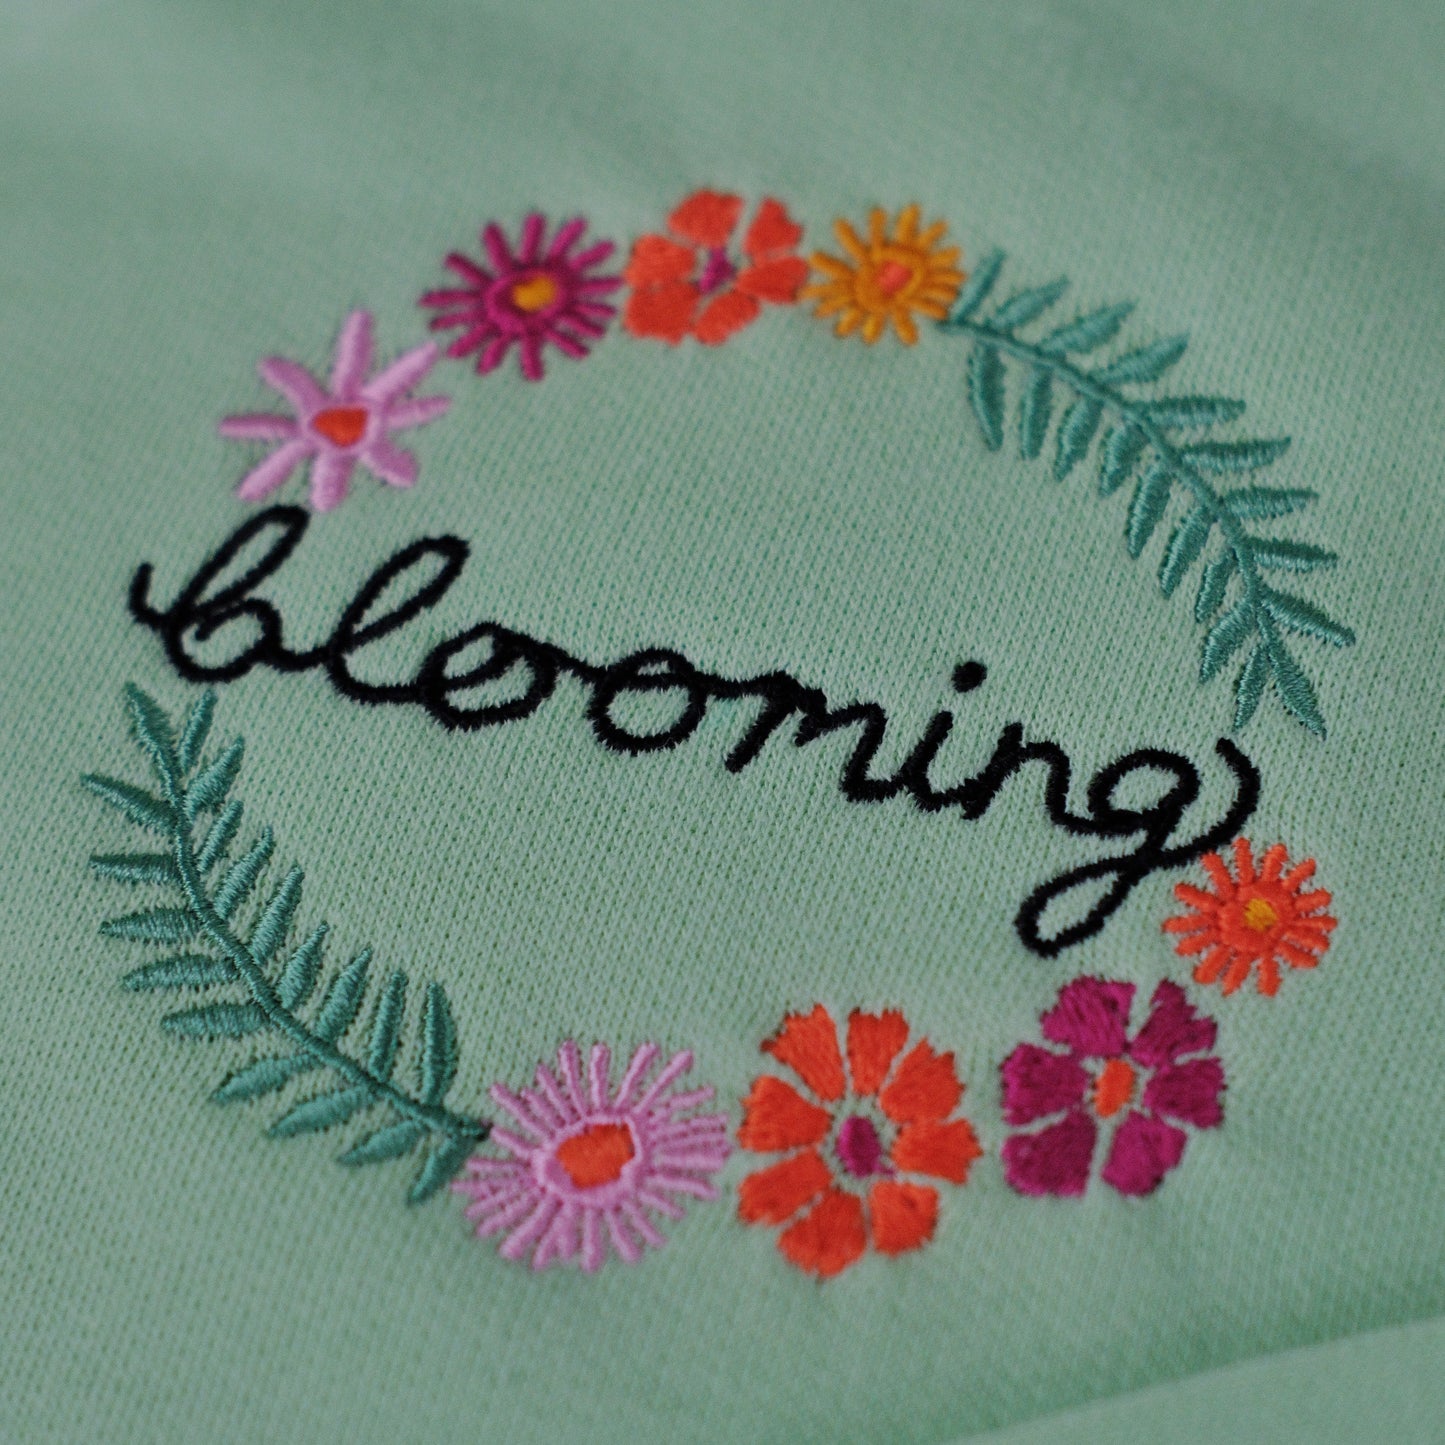 blooming embroidered zip-up hoodie - mint